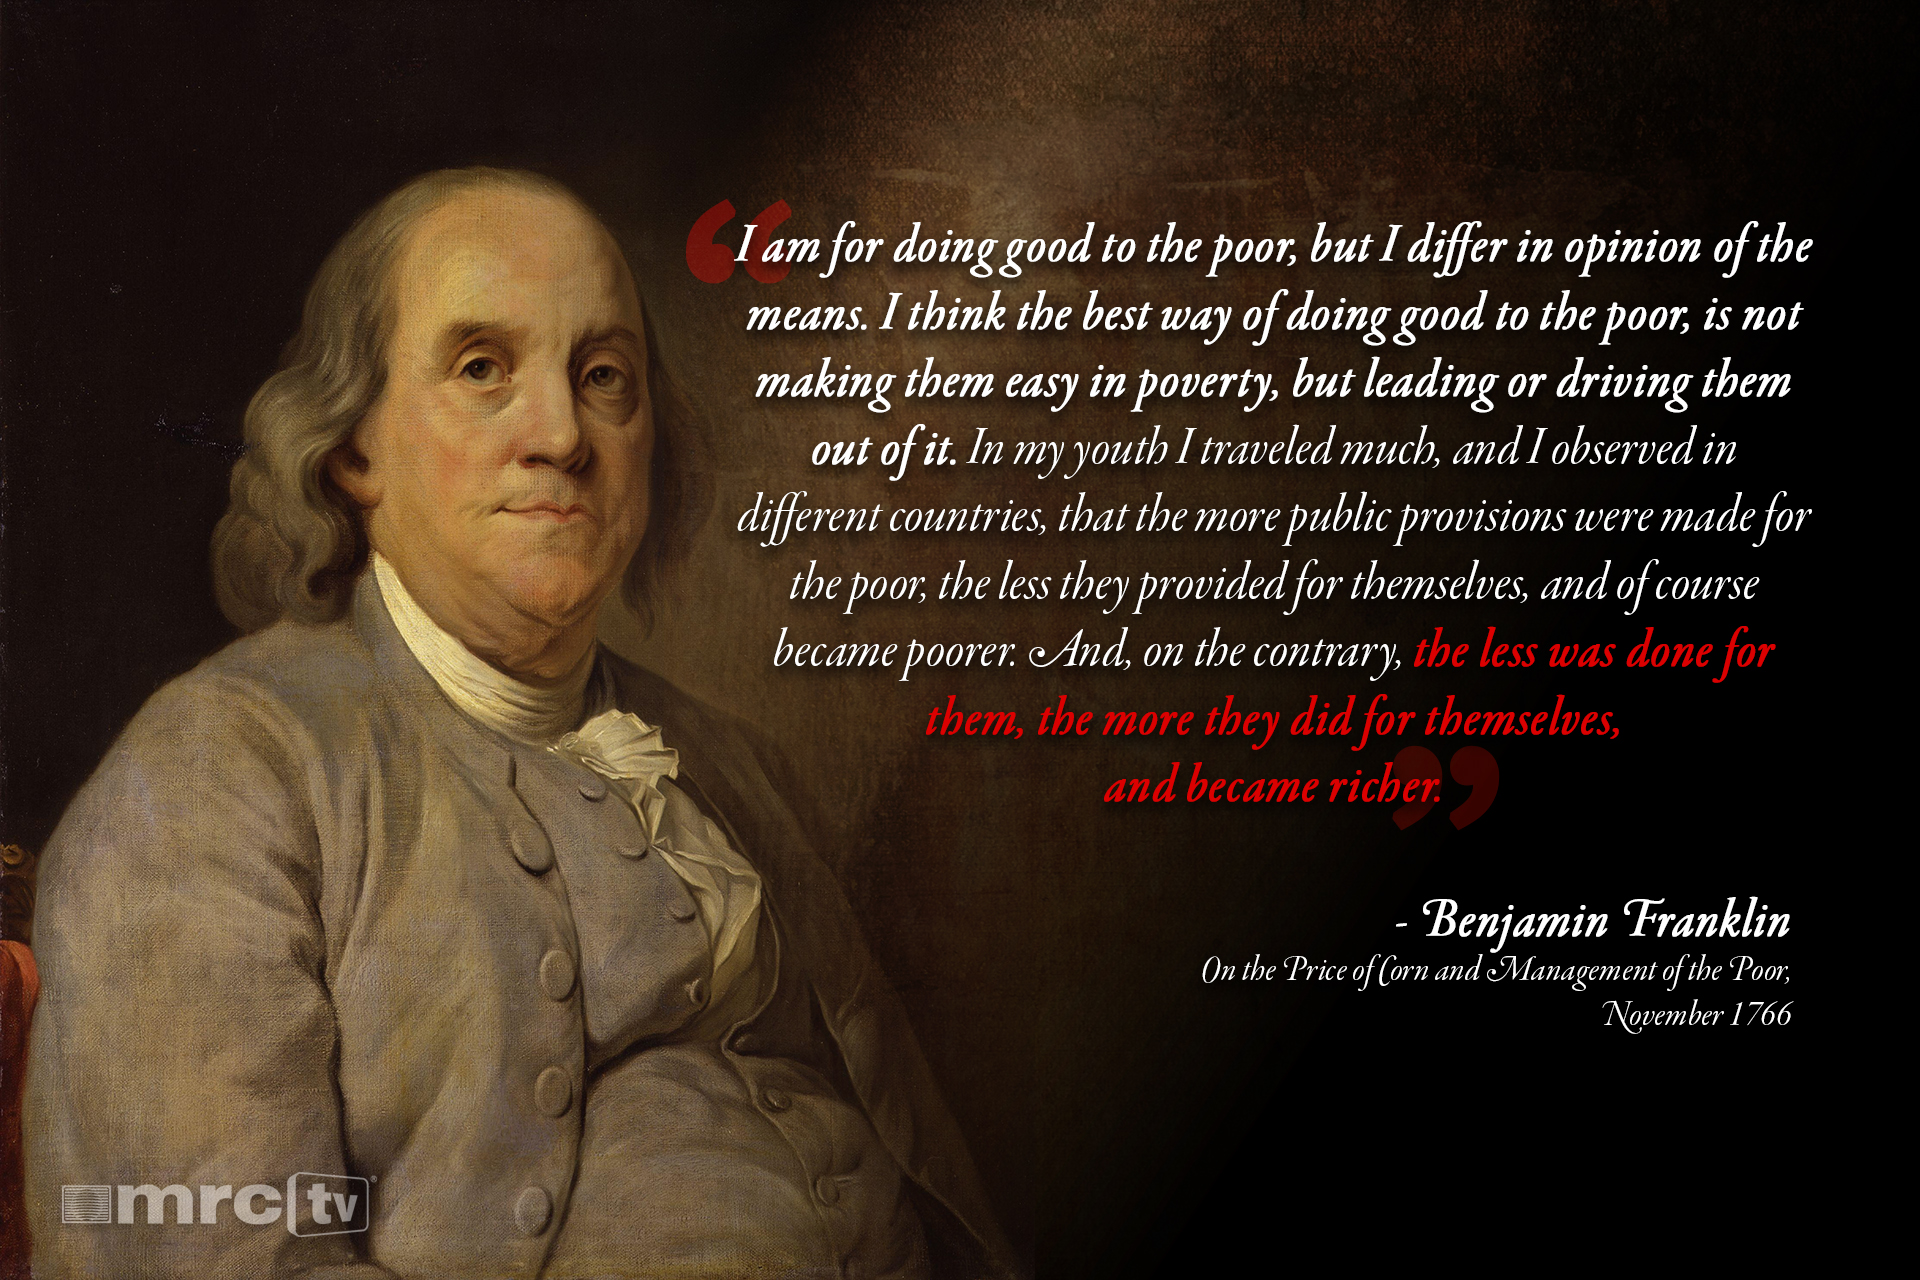 Check Out These 10 EPIC Quotes from Our Founding Fathers